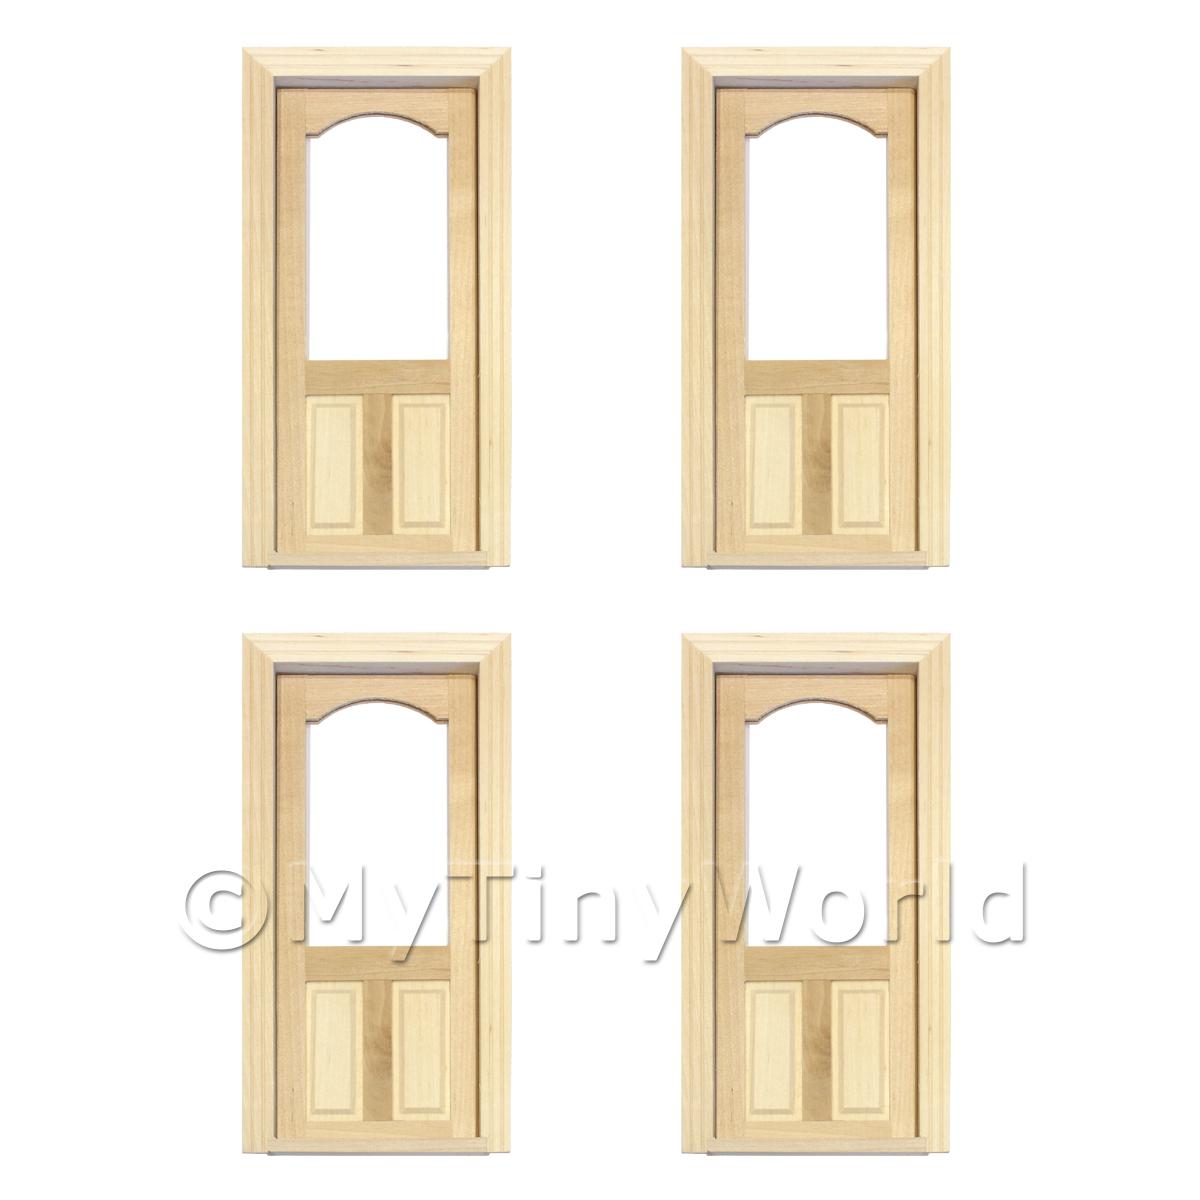 1/12 Scale Dolls House Miniatures  | 4 x Dolls House Decorative Wood Door With Glazed Upper Panel